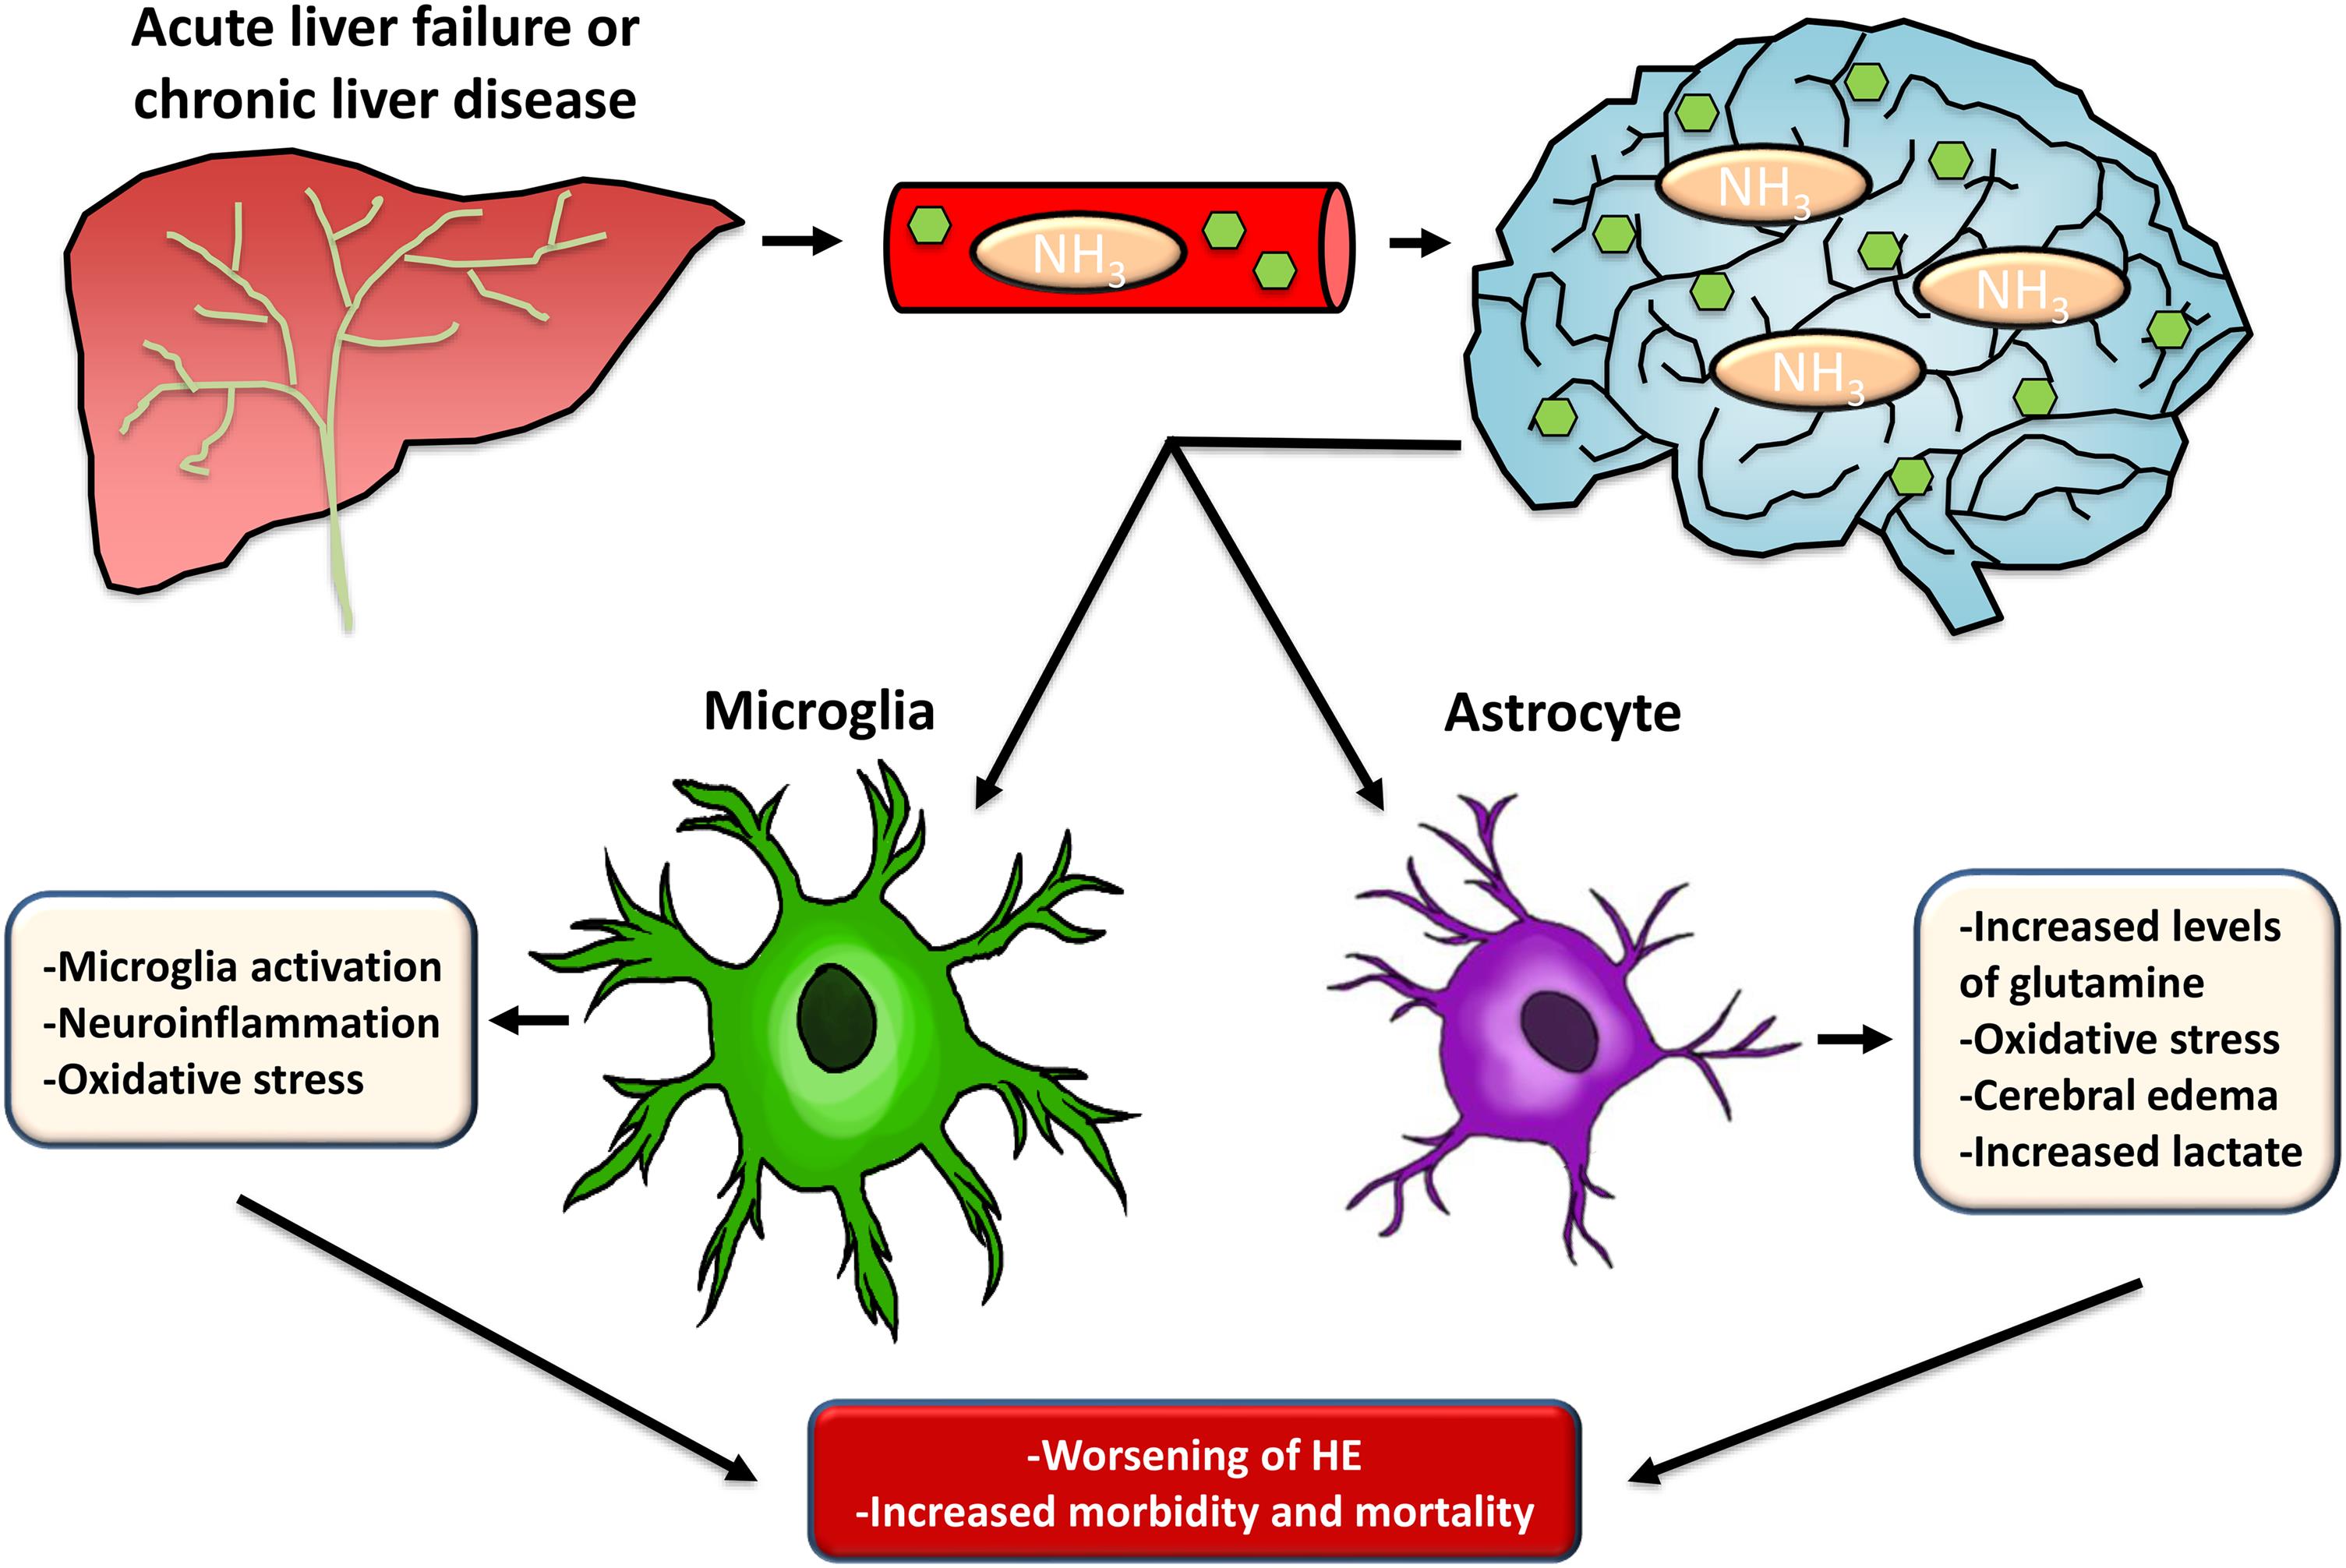 Summary of the involvement of microglia and astrocytes in HE pathology.